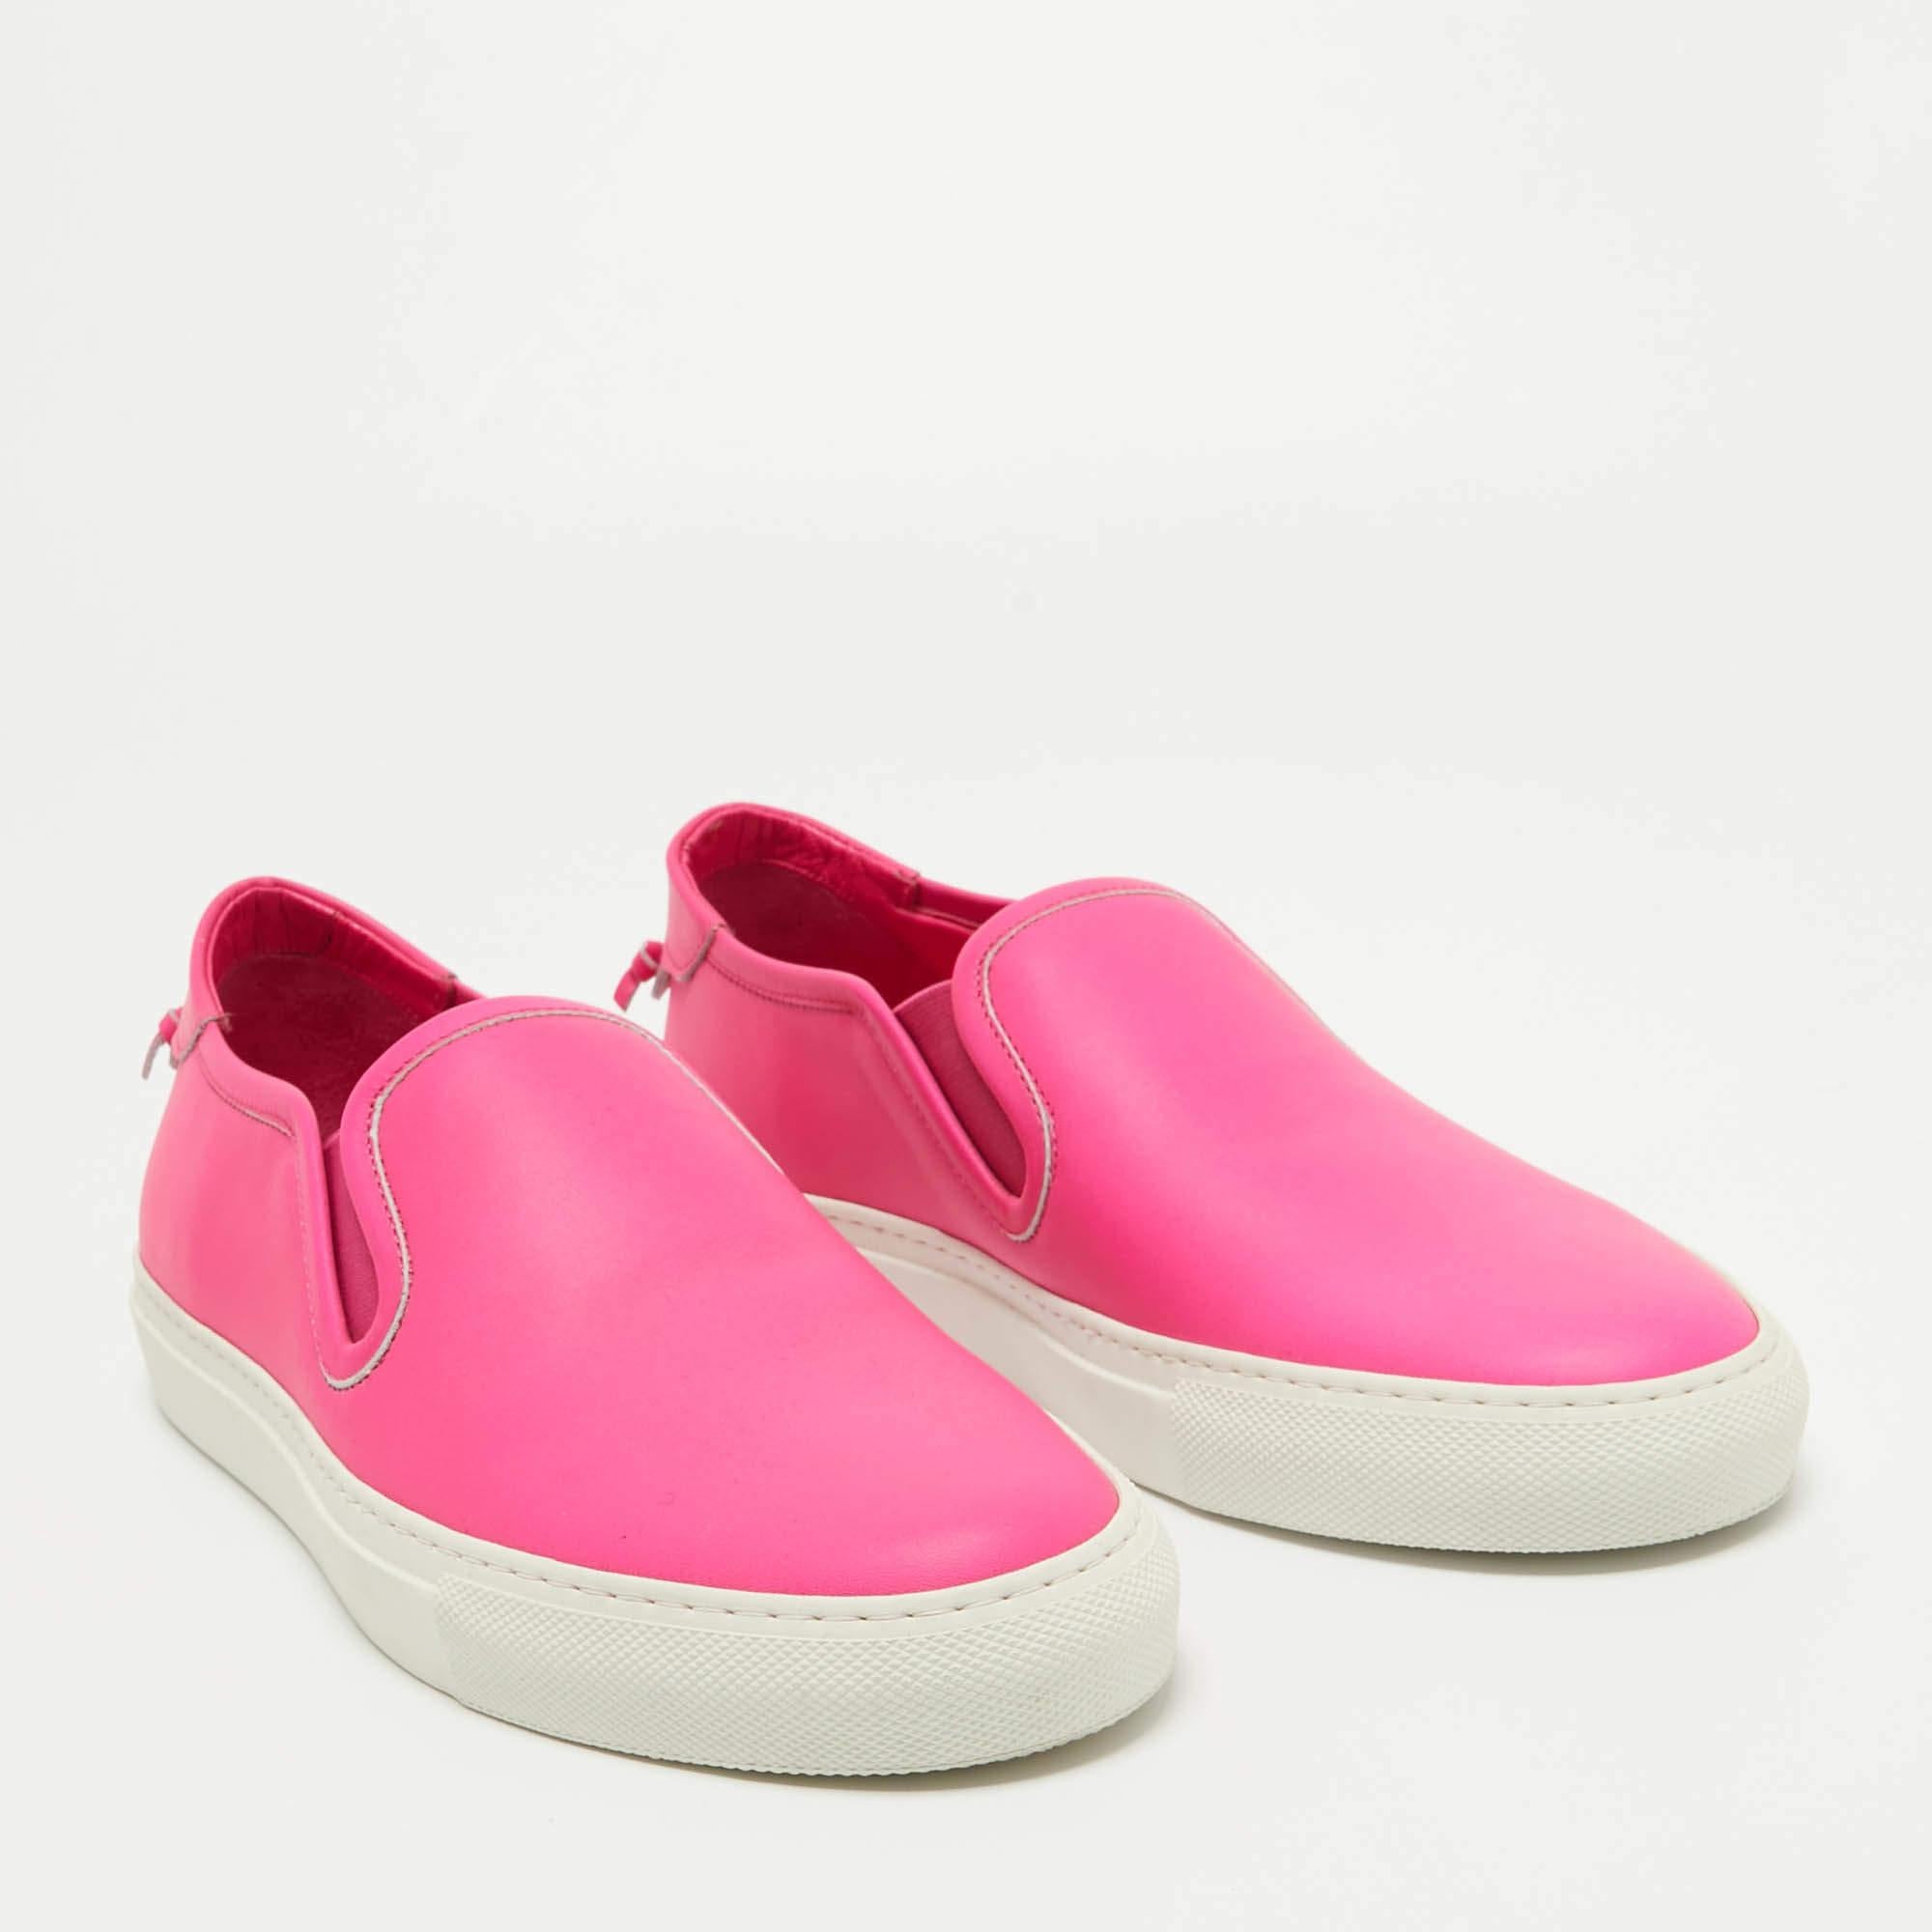 Givenchy Pink Leather Slip On Sneakers Size 40 For Sale 3